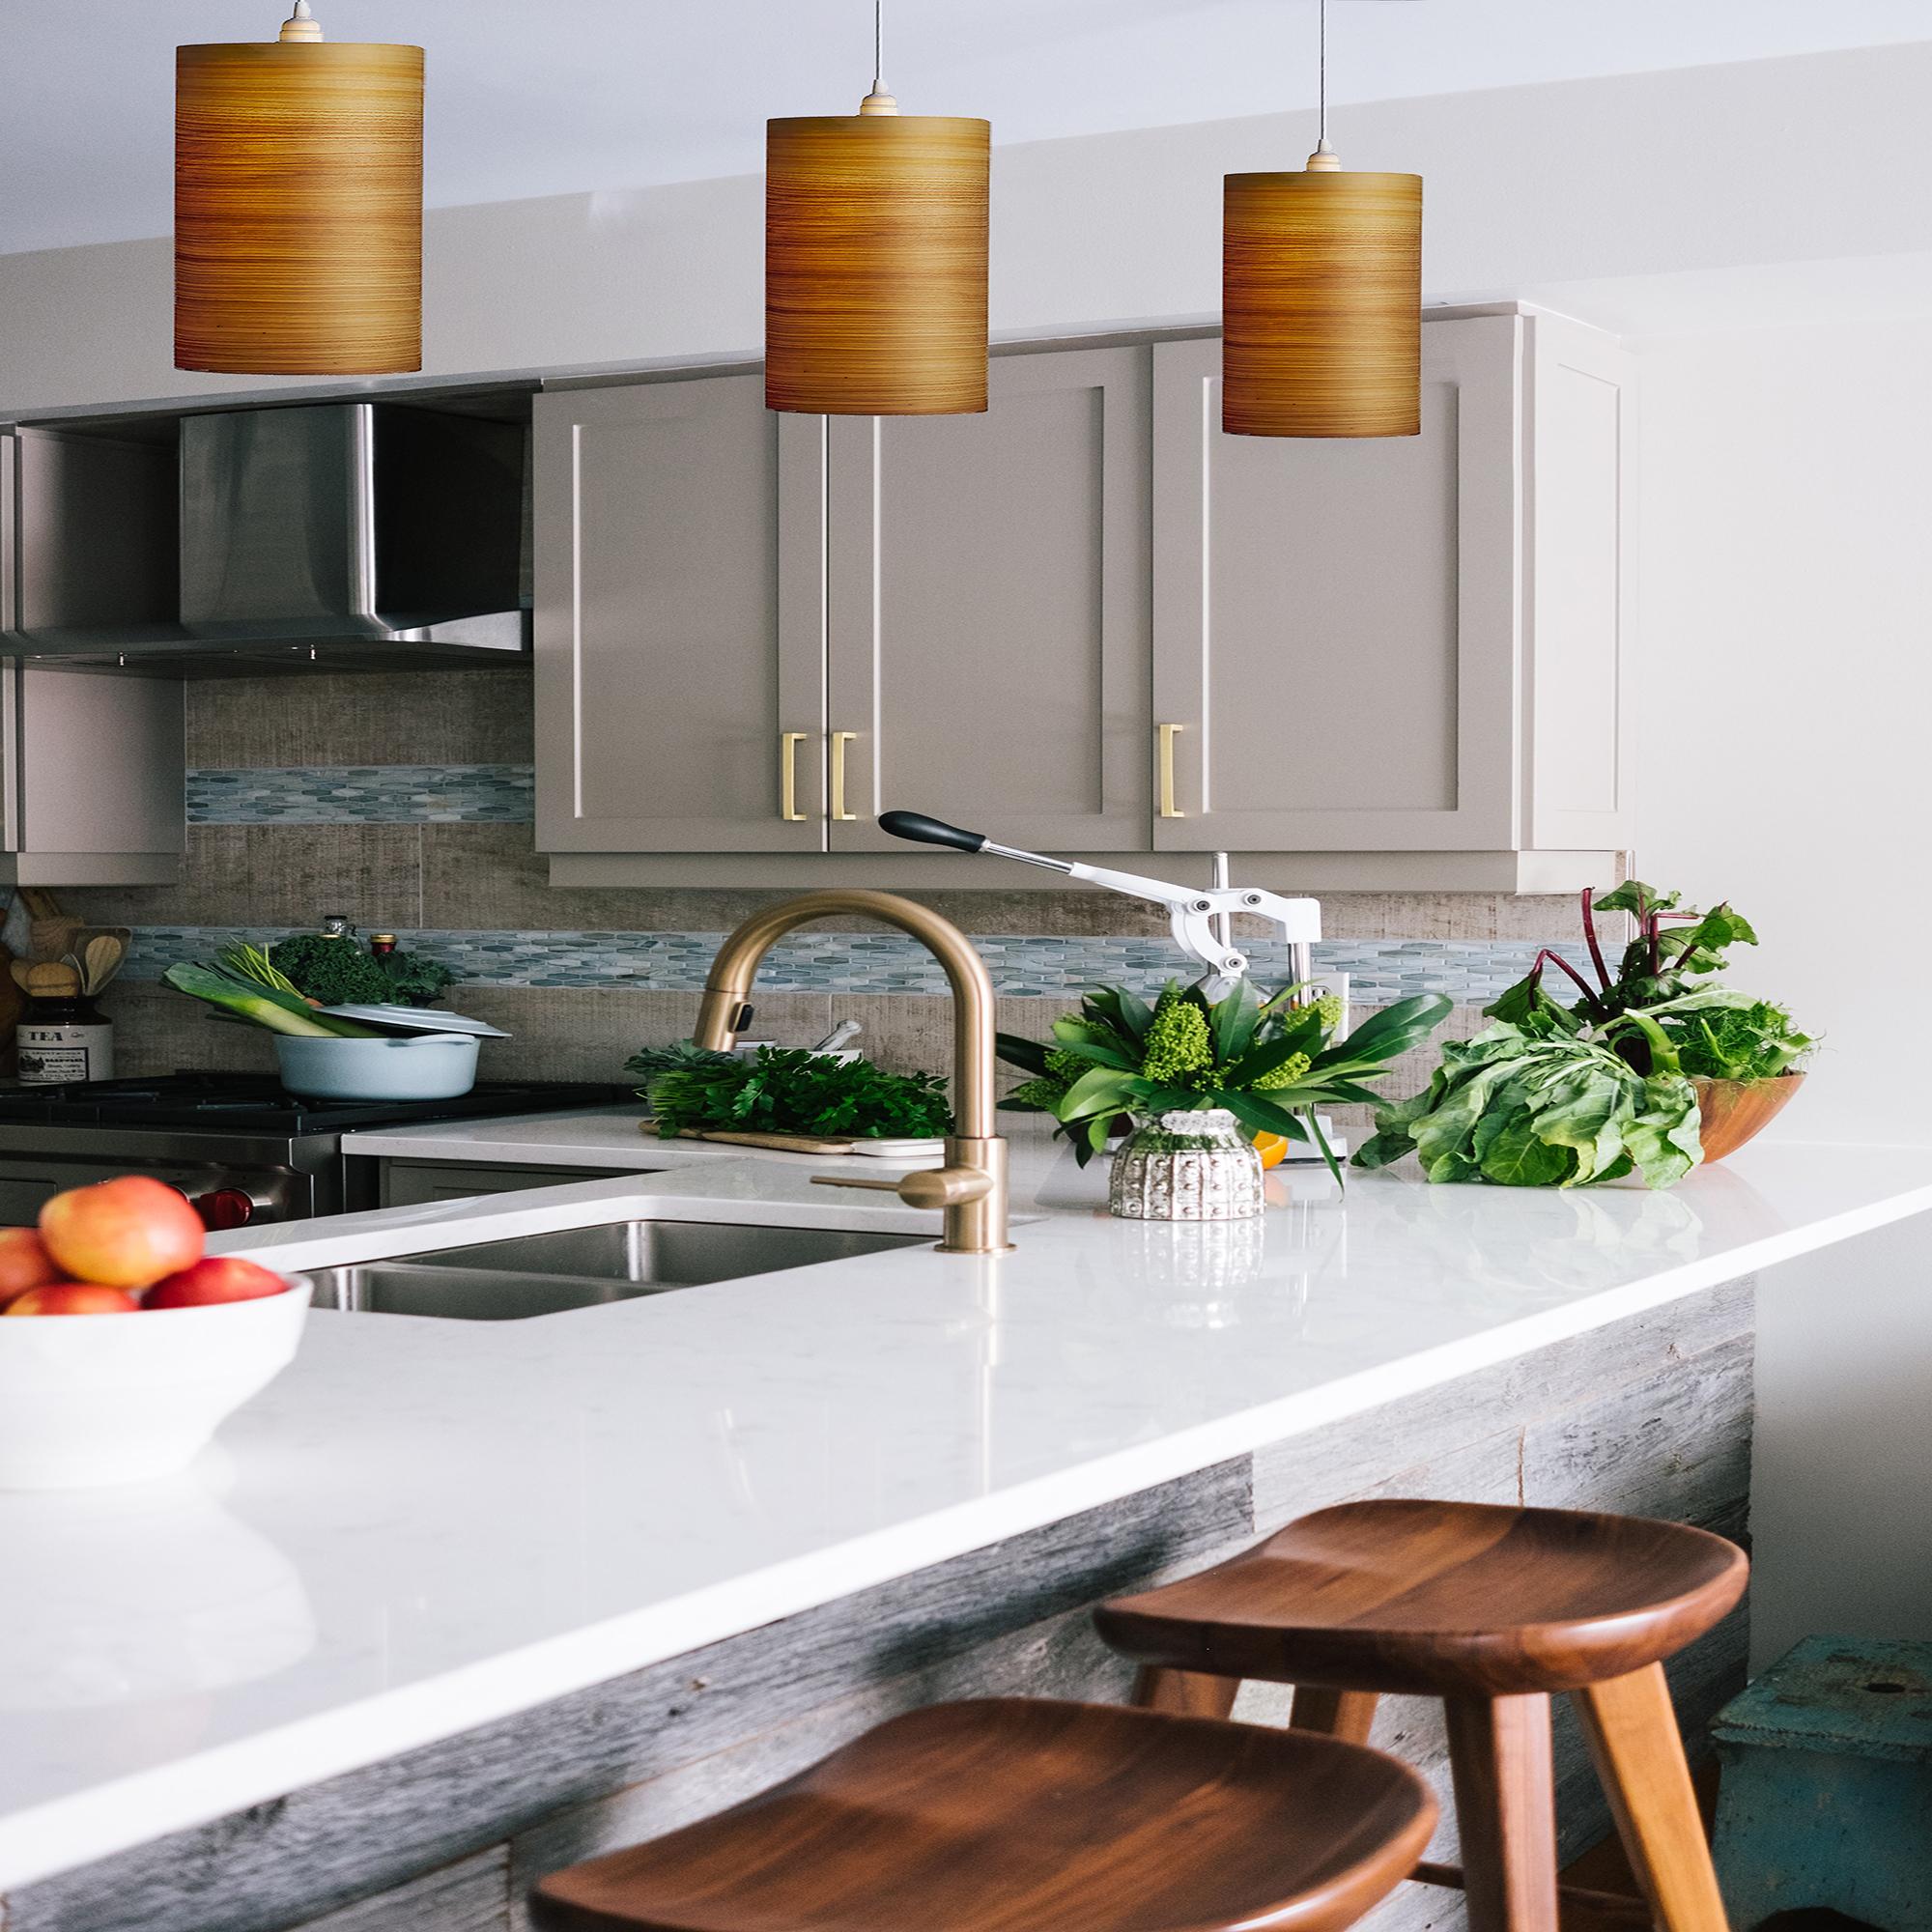 CENTA is a contemporary, Mid-Century Modern light fixture. This is a minimalist luxury pendant design and can be exhibited in dining rooms, entryways, alcoves, and over kitchen islands. This Limited-Edition piece is made with cypress wood. This rare